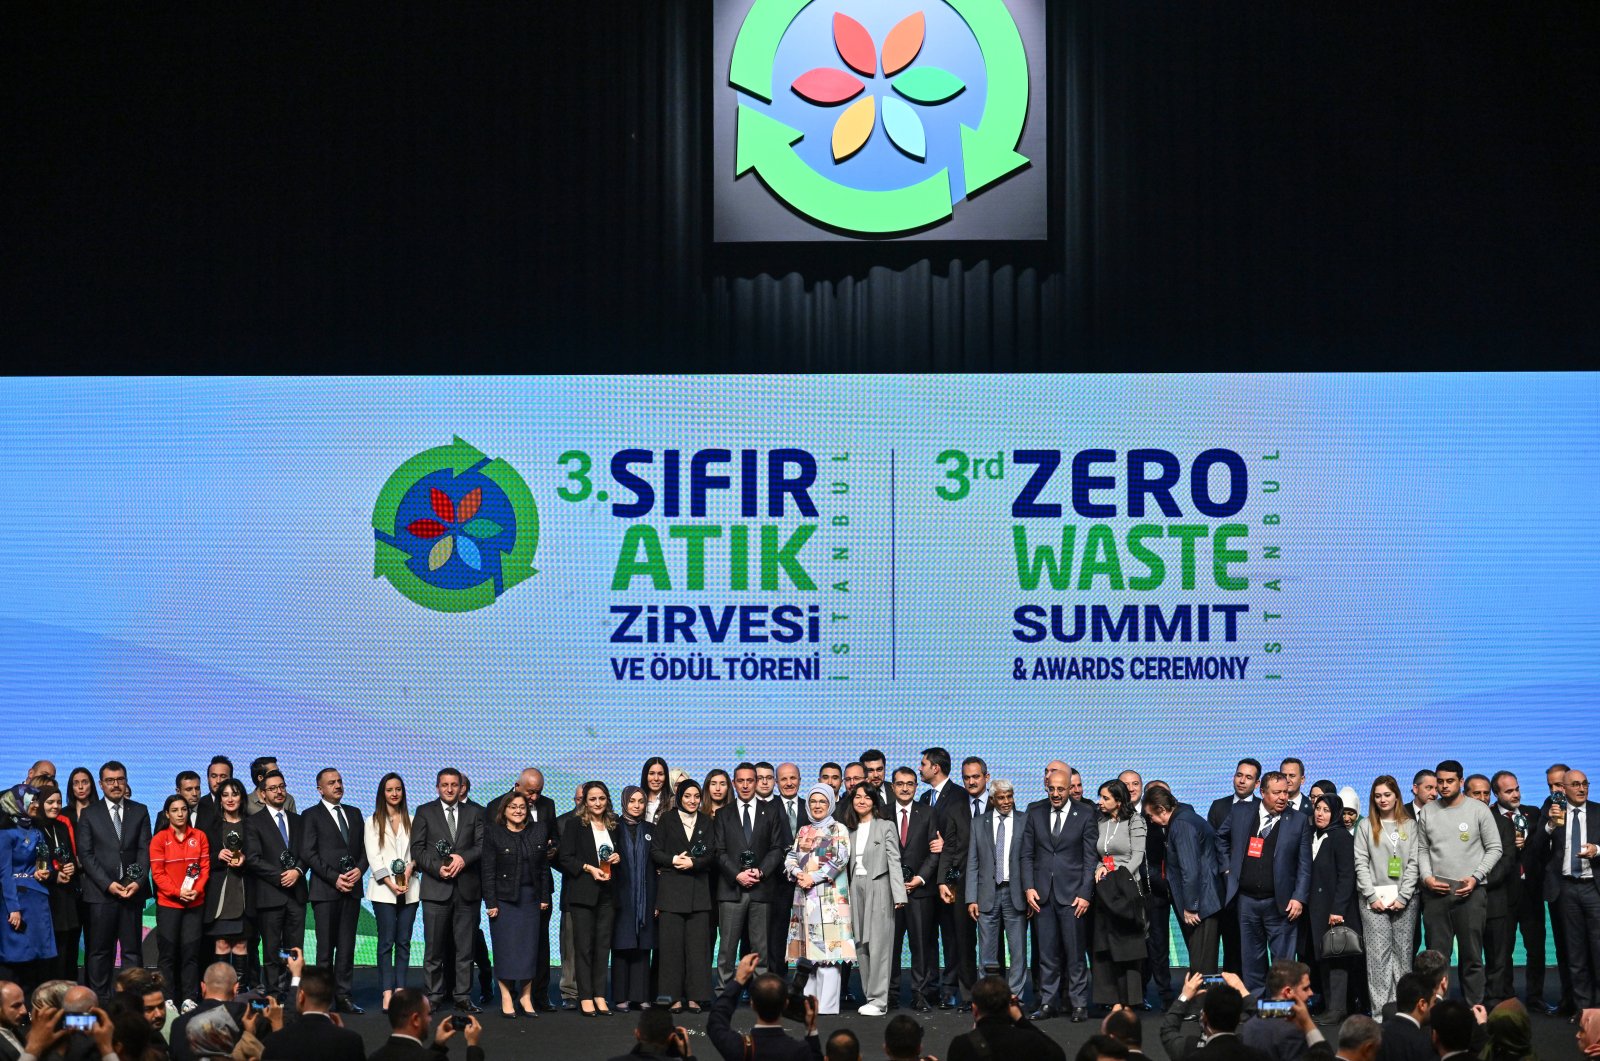 First Lady Emine Erdoğan and other participants pose for a group photo at Haliç Congress Center in Istanbul as part of the zero waste summit, Dec. 23, 2022. (AA Photo)